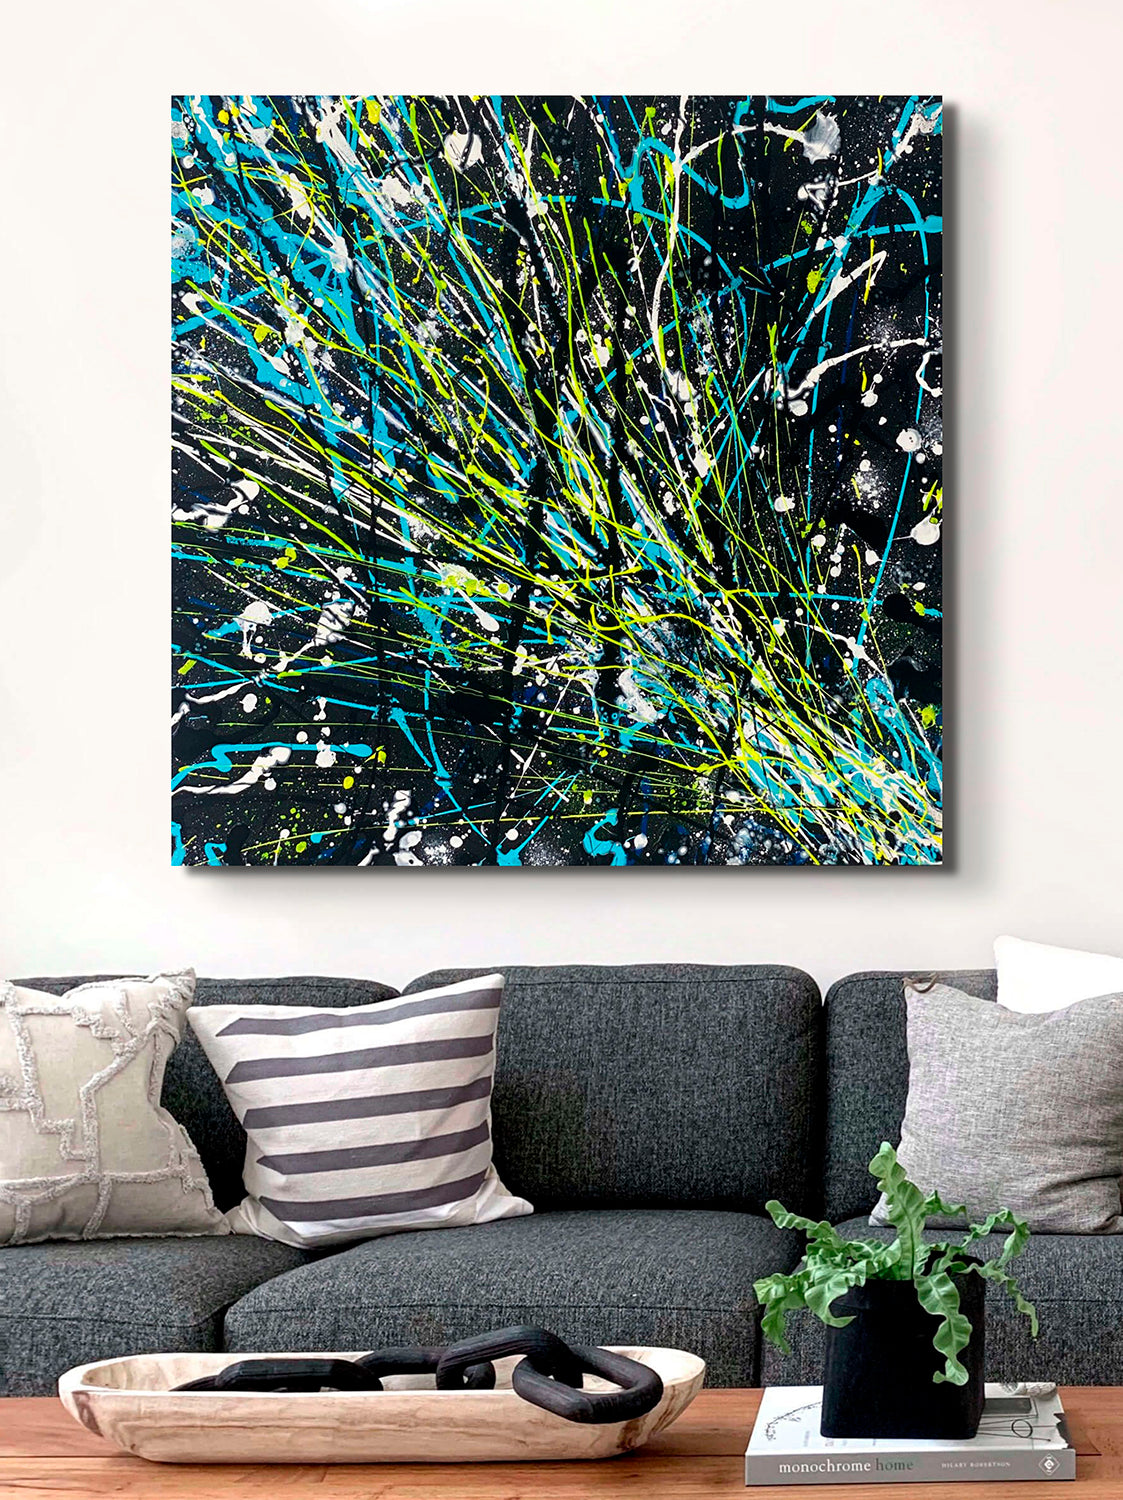 'Comet' Original Abstract Painting on canvas by Bridget Bradley, Vibrant , neon space art to capture your imagination, seen unframed above grey sofa and cushions. Modern contemporary art, Australia.